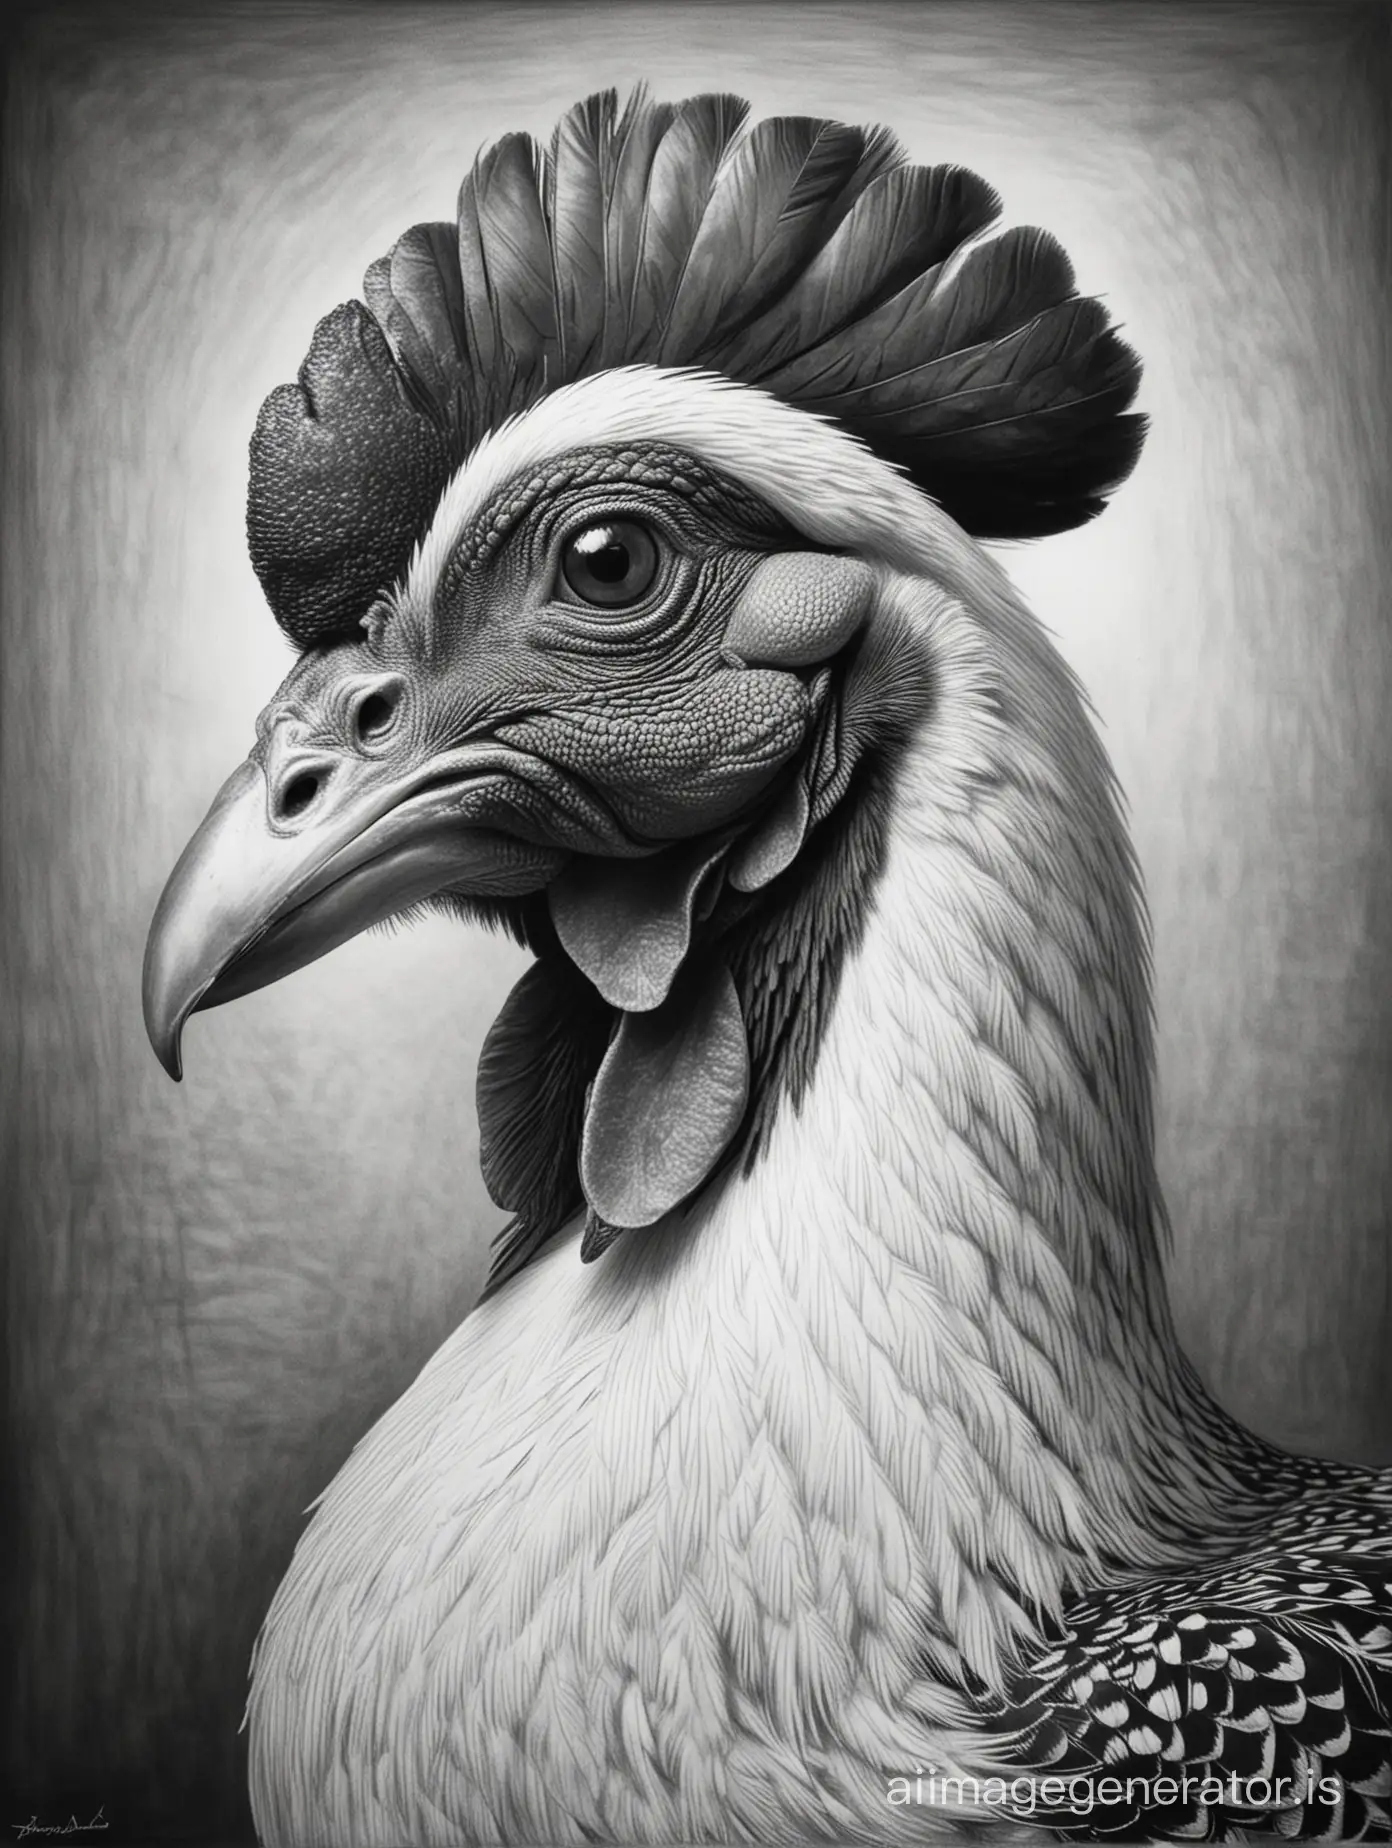 PicassoStyle-Monochrome-Artistic-Rendering-of-a-Malay-Gamefowl-Head